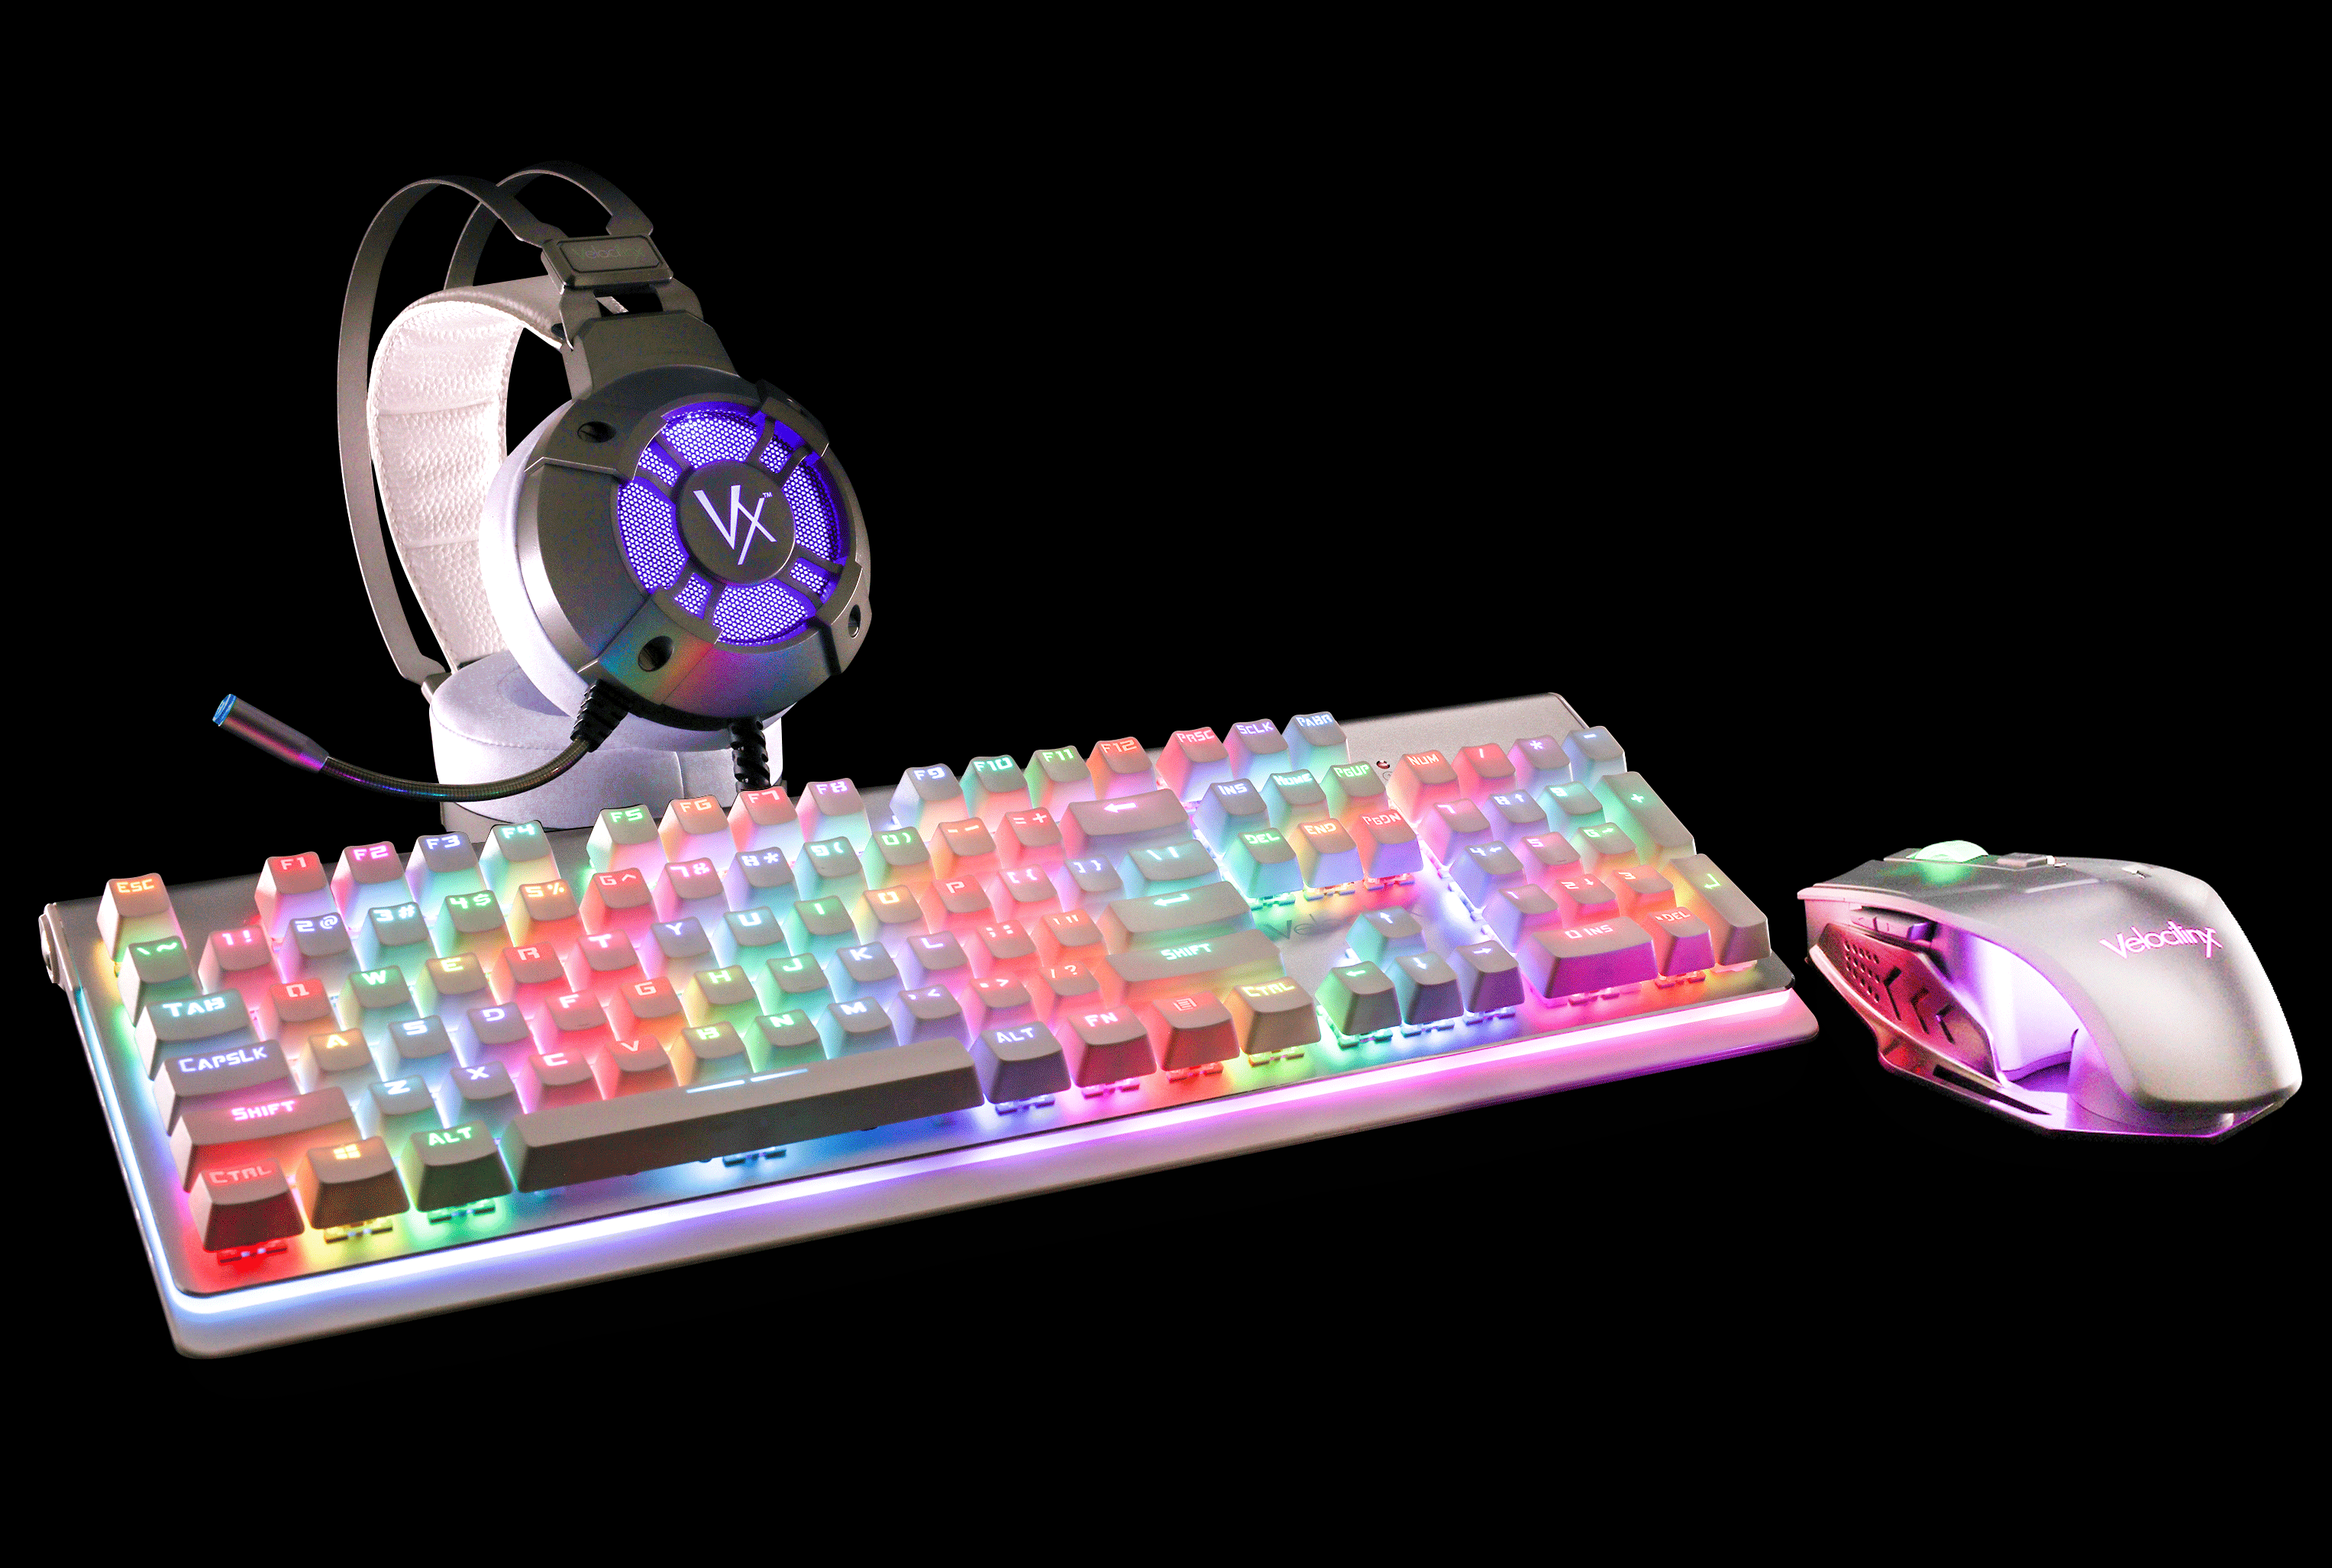 Boudica headset, keyboard and mouse